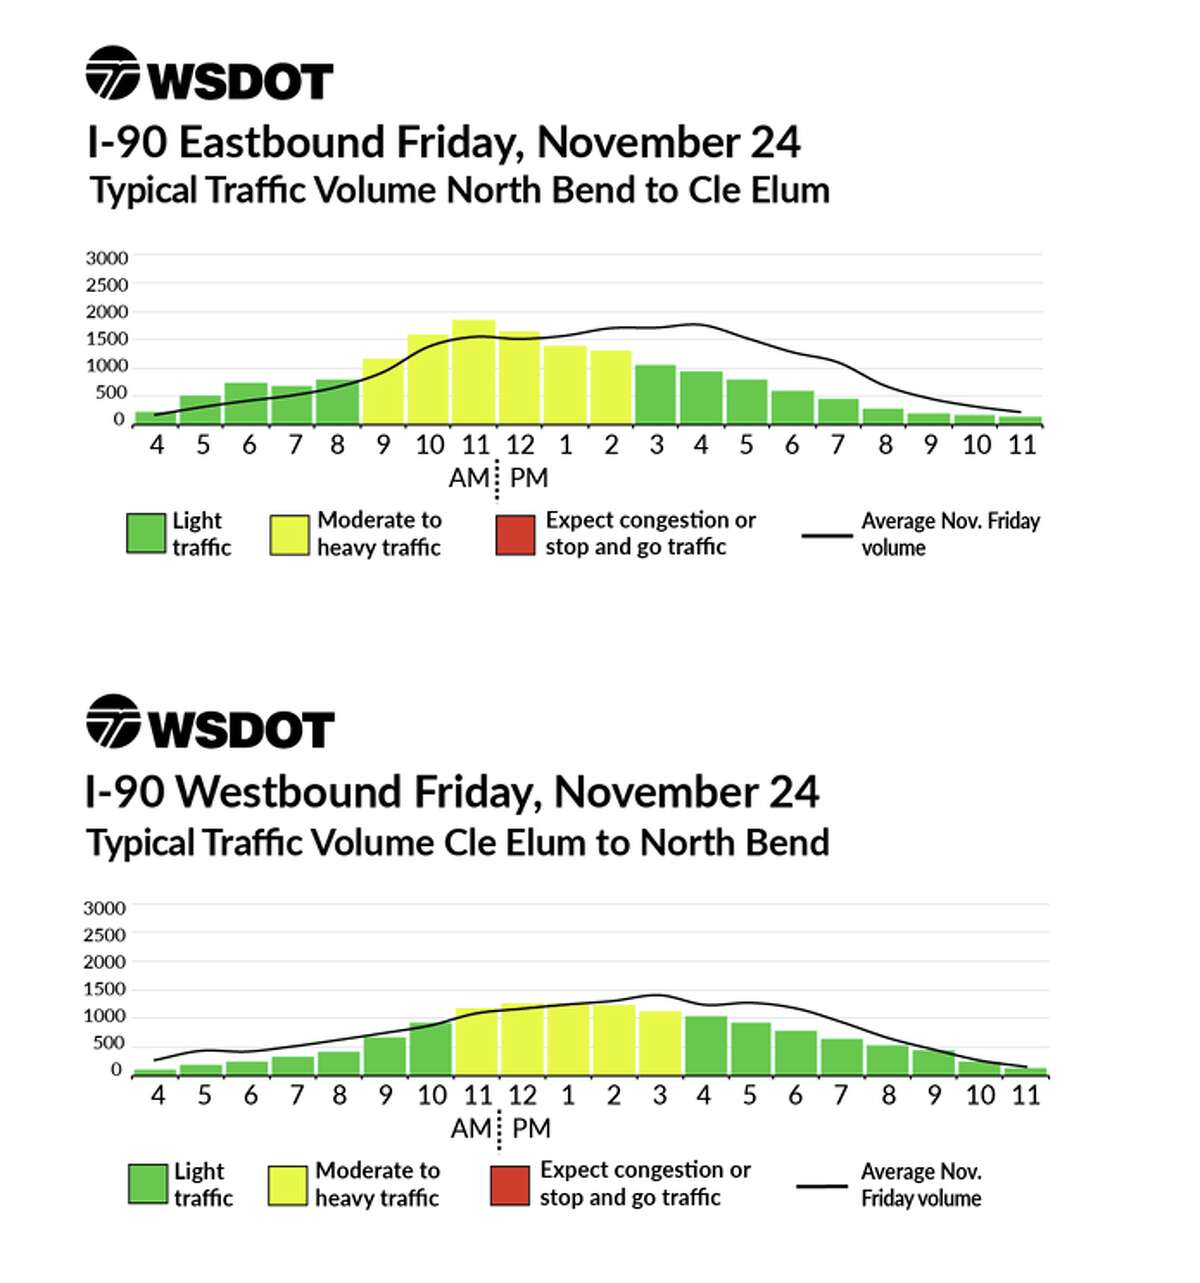 WSDOT's typical traffic volumes around Thanksgiving weekend, based on historical traffic data. Note that the black line is typical traffic volume, so anything above that is added holiday traffic.